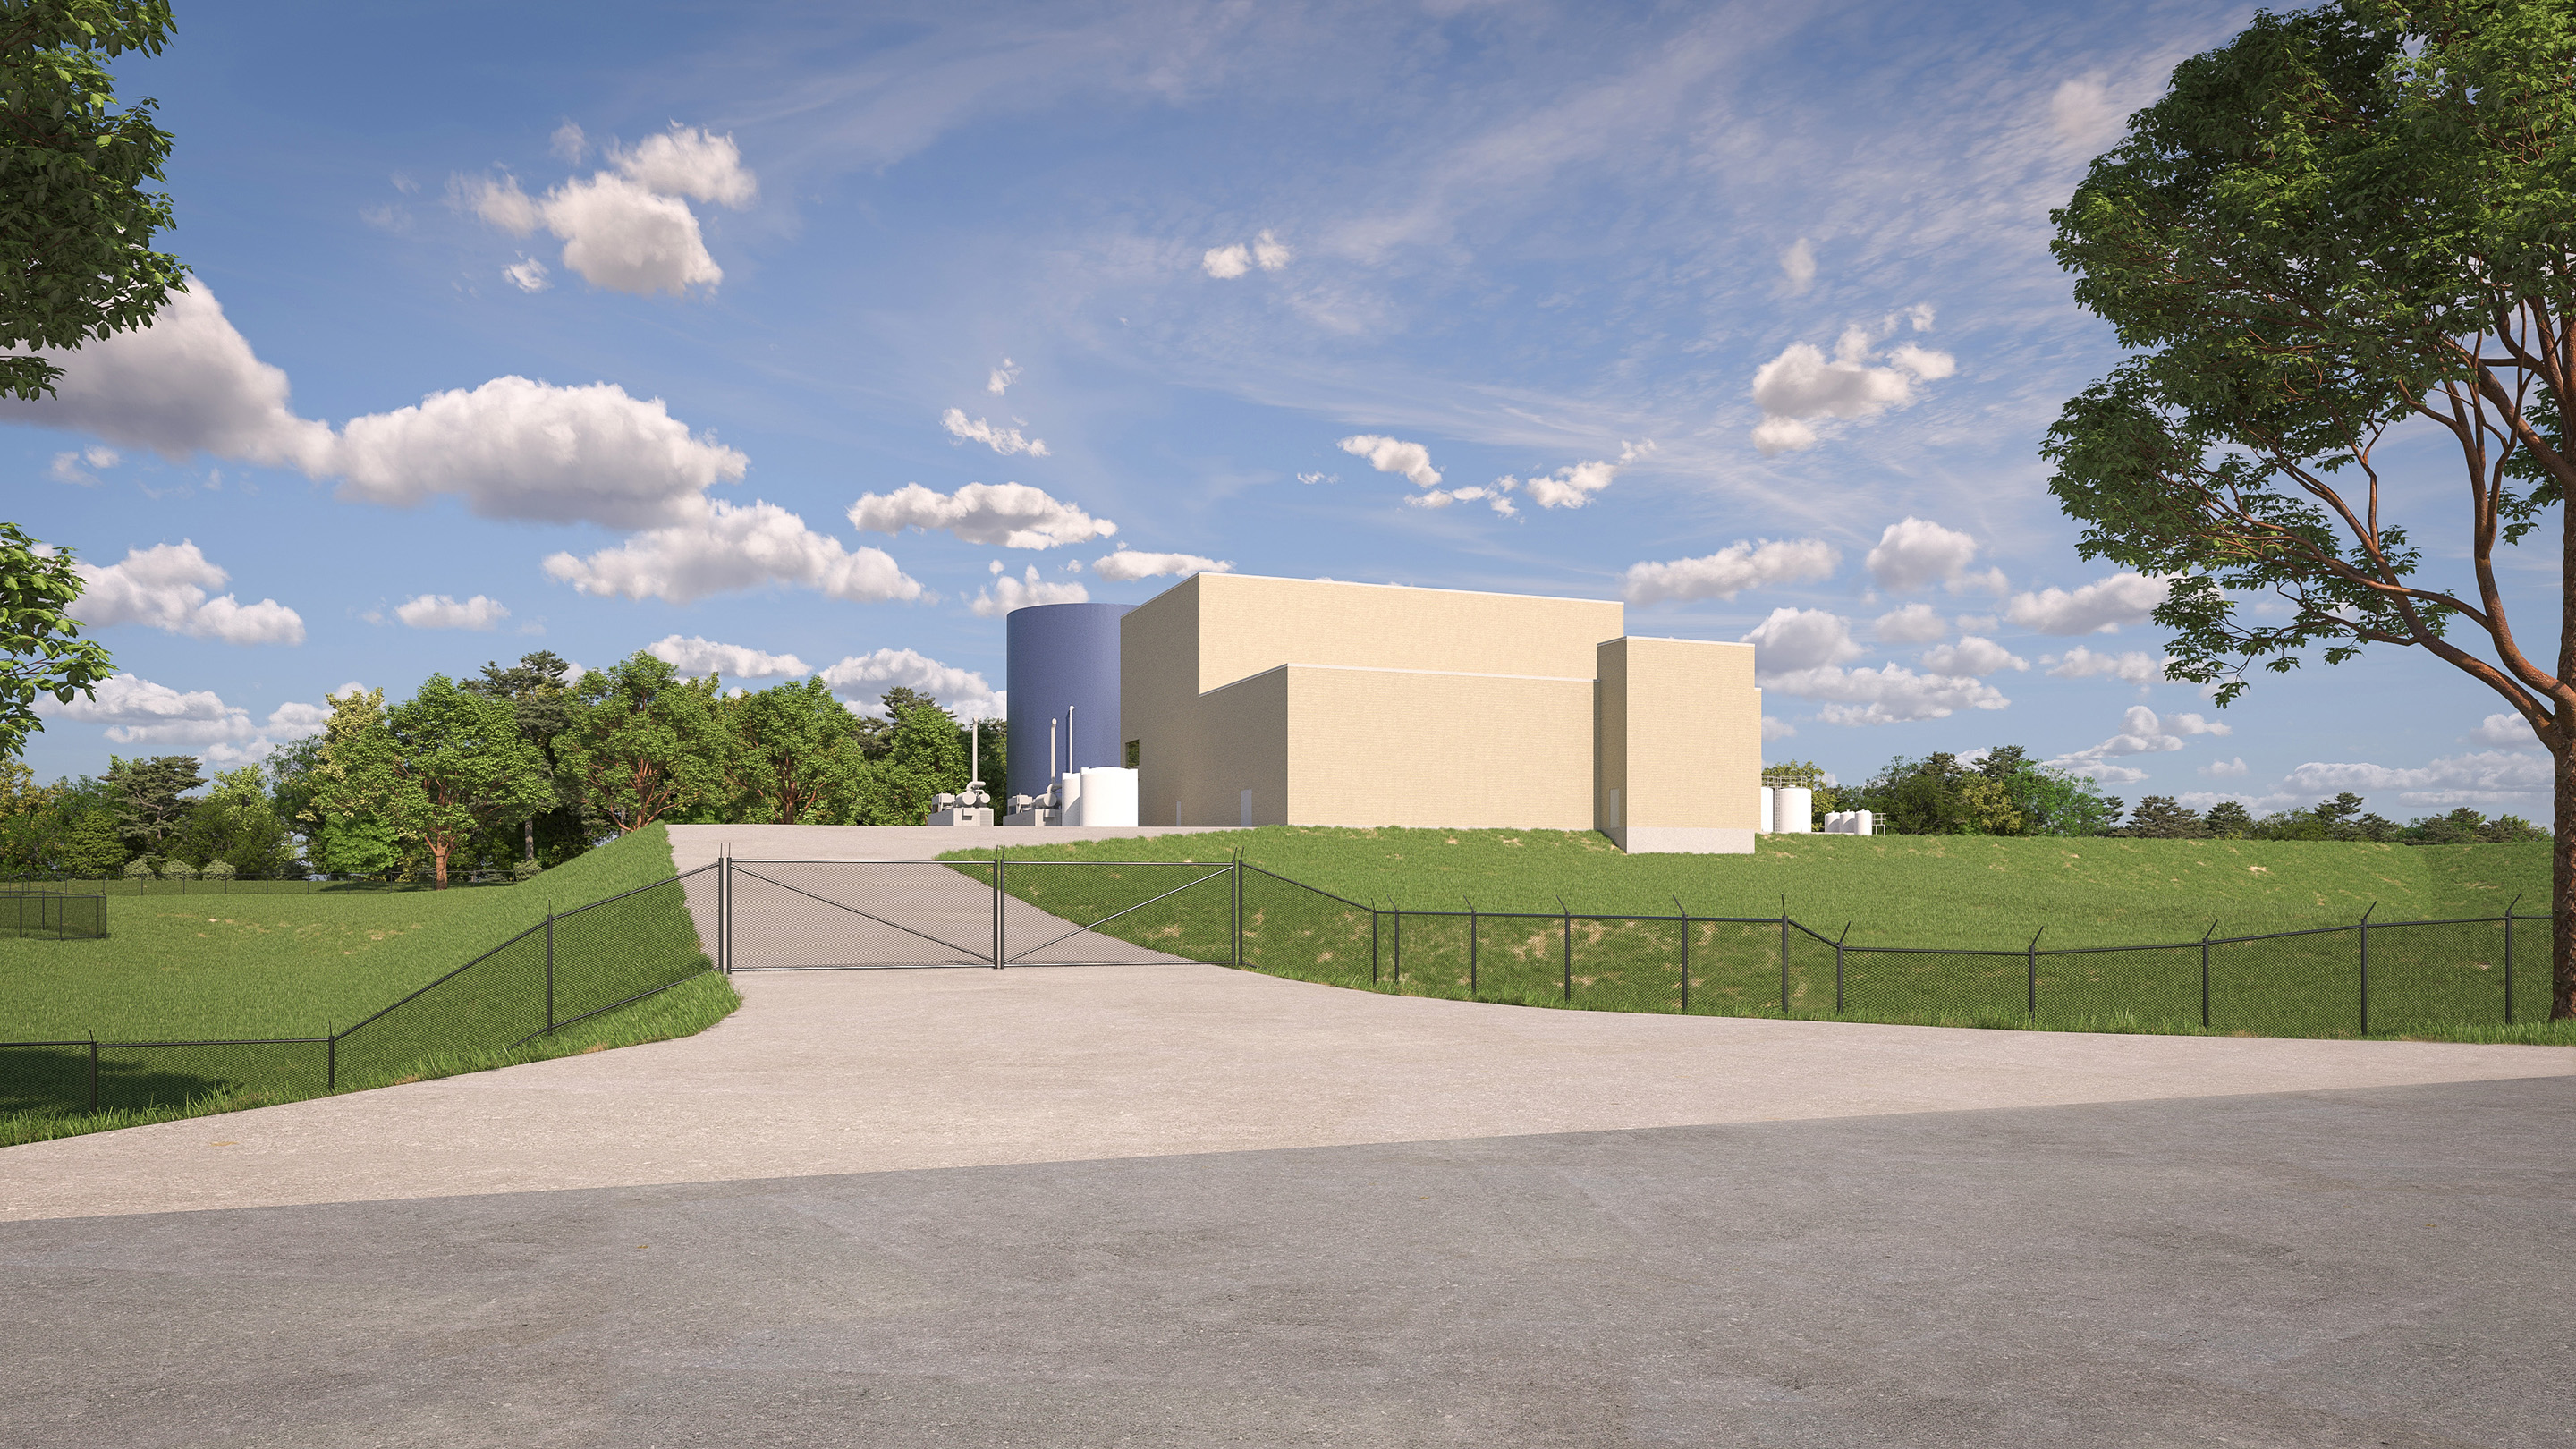 Rendering of new Anaerobic Digestion facility (as seen from Kellogg Avenue)